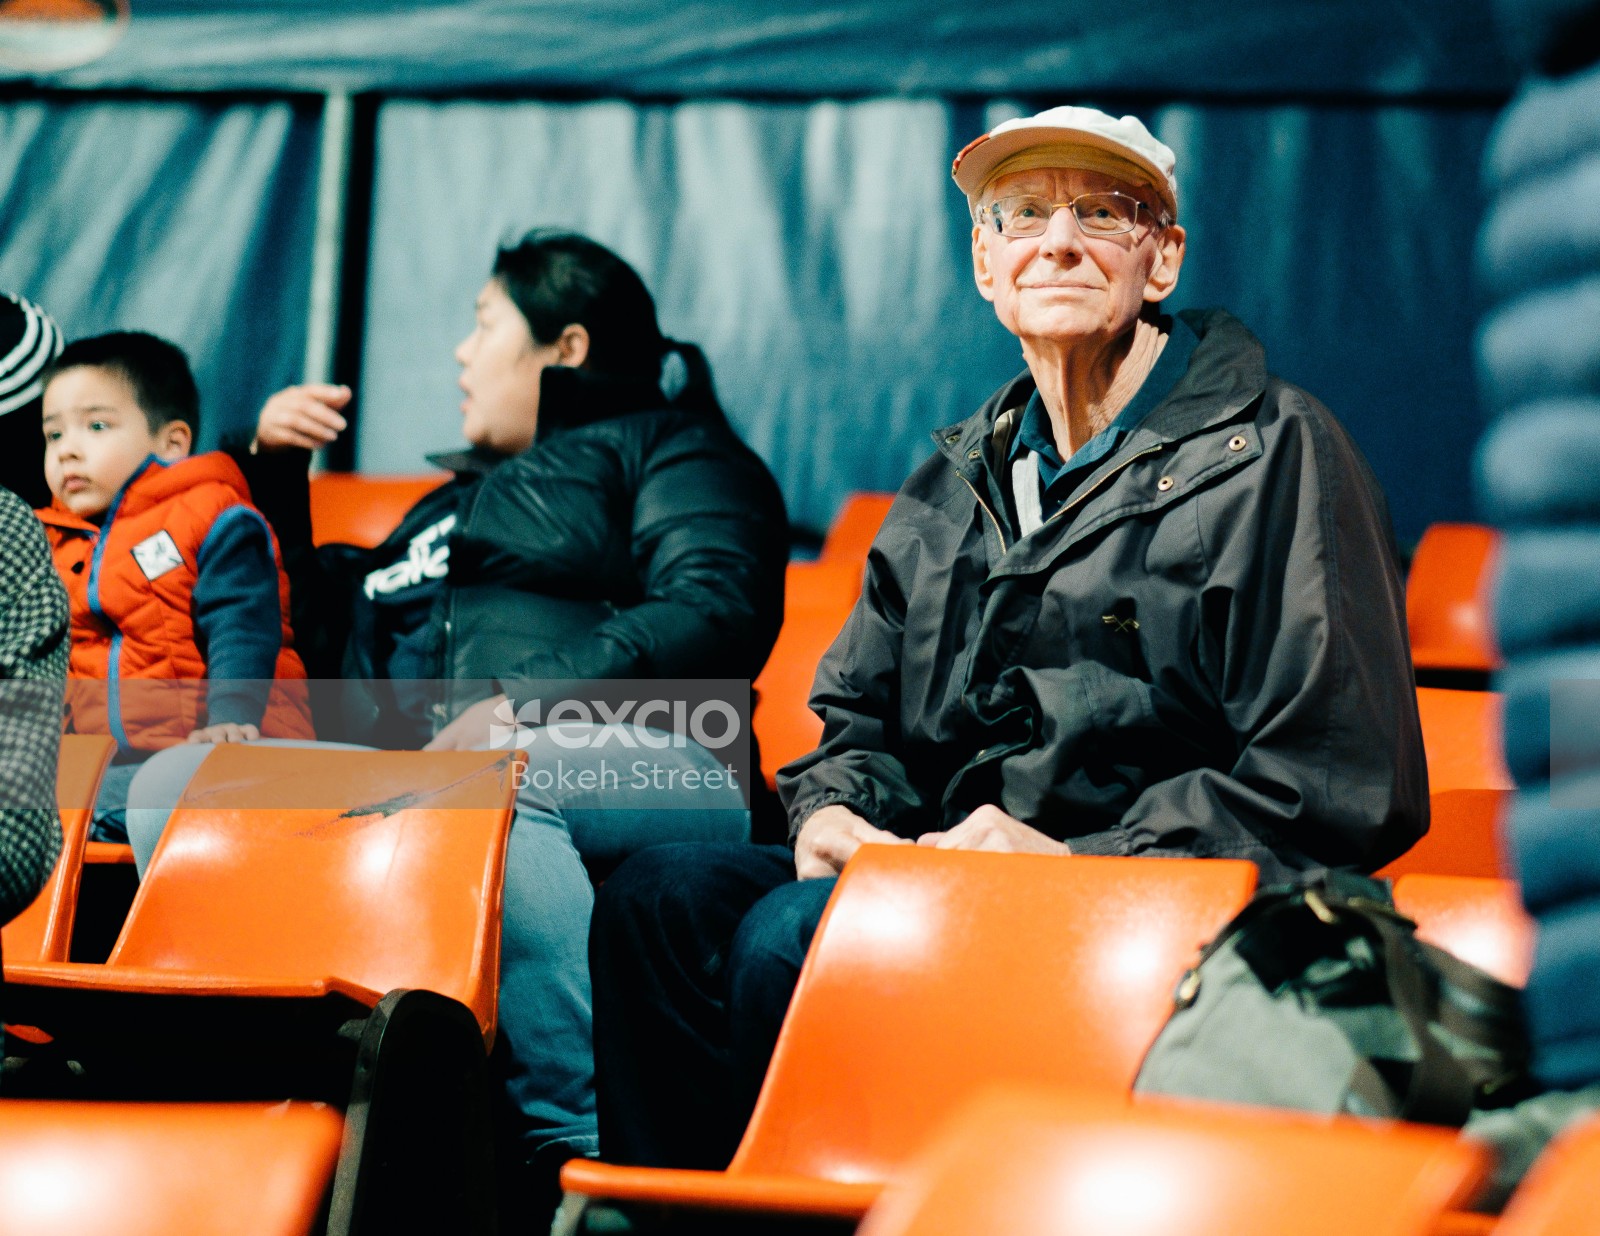 Old guy in audience sitting on orange seat